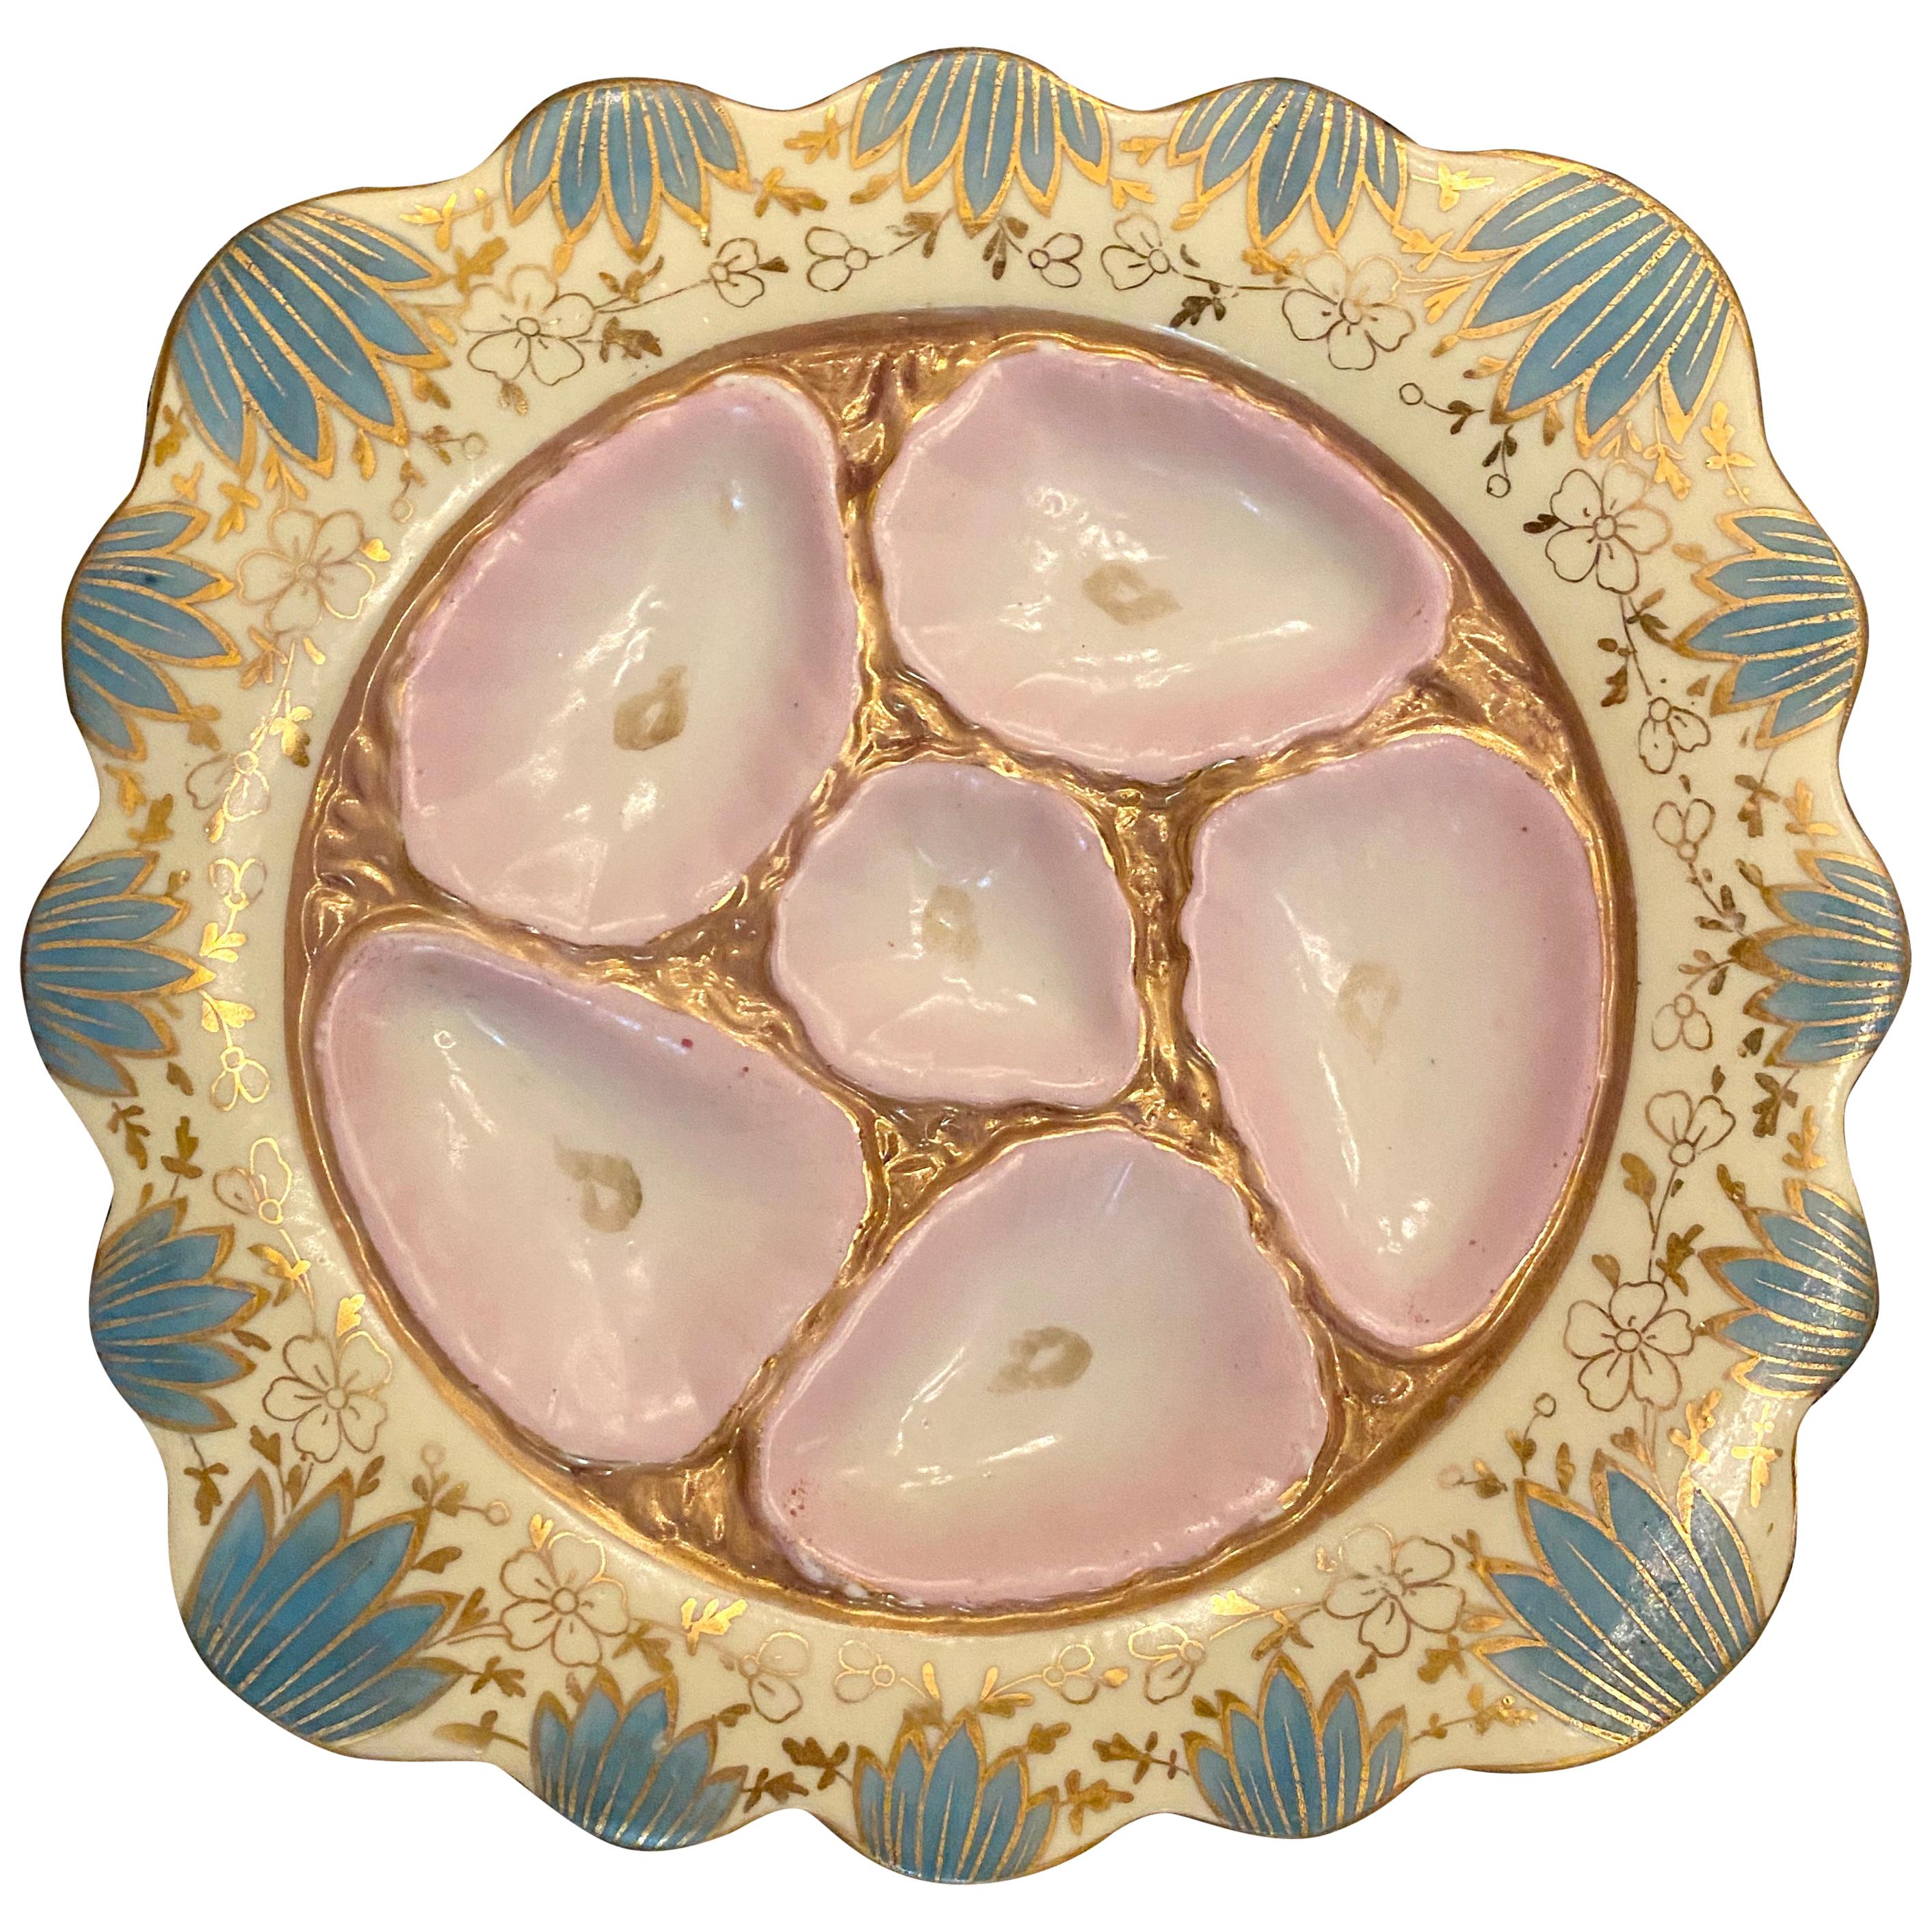 Antique German Hand Painted Porcelain Oyster Plate, circa 1880s